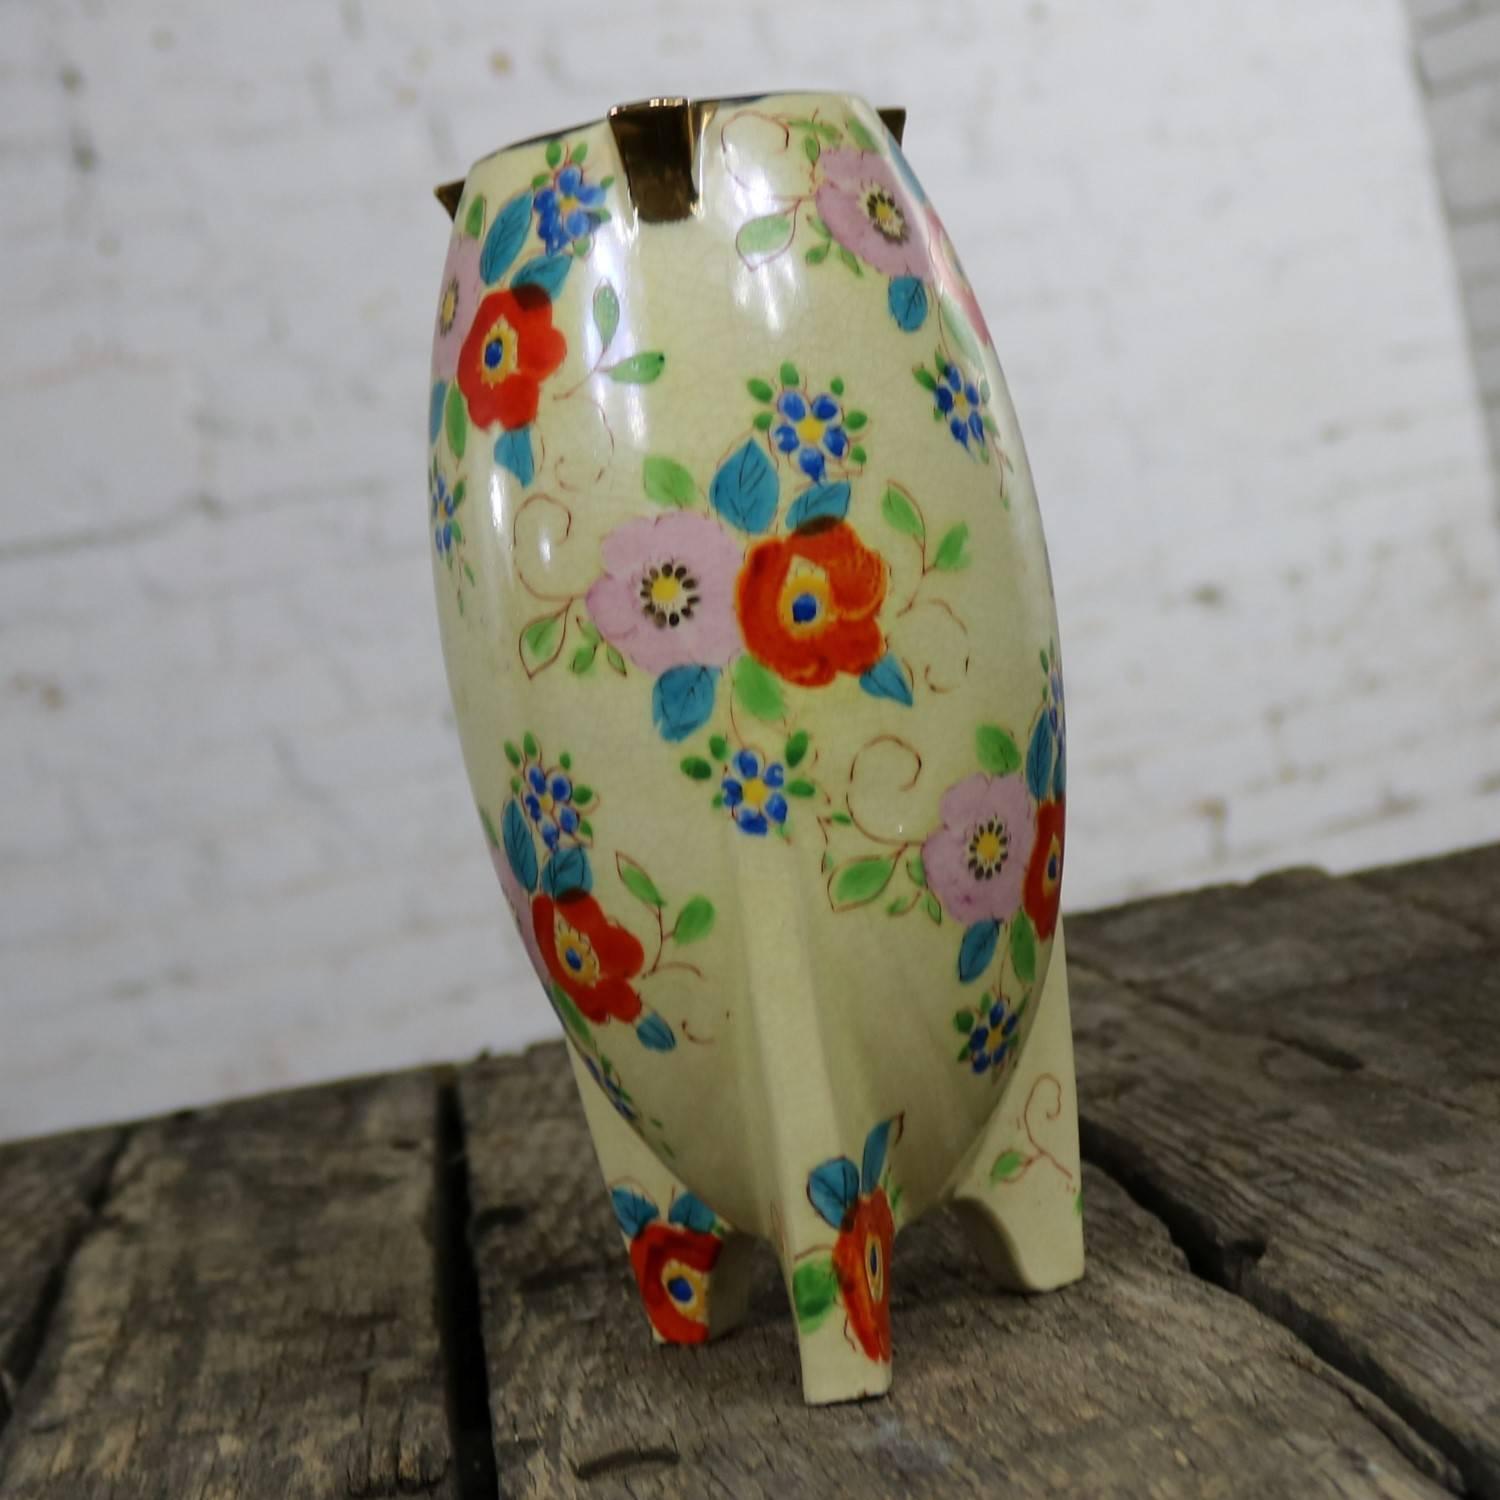 Beautiful Japanese bullet shaped or rocket shaped Art Deco lusterware vase in a floral design with gold accent. This vase is in wonderful vintage condition with no major flaws. There is a small chip to the underside of one of the feet. It does have